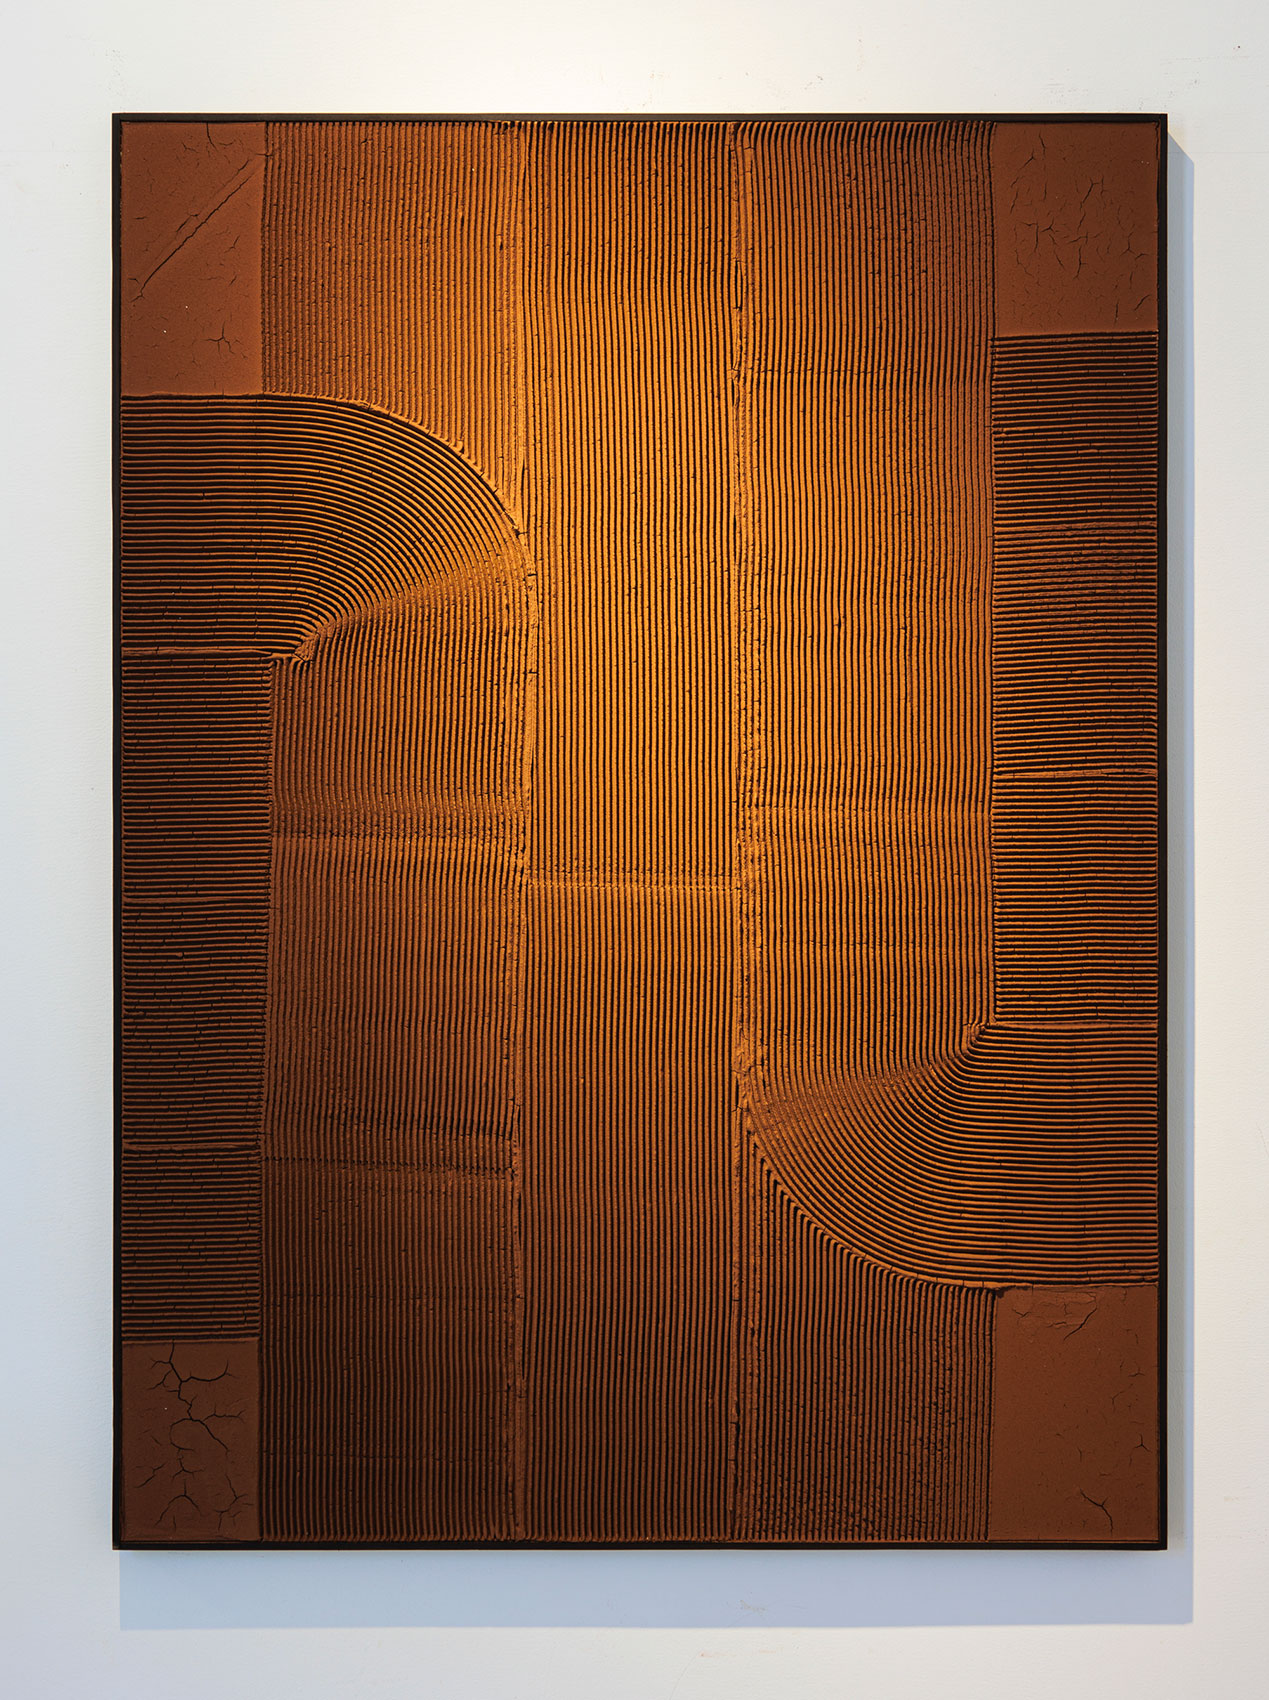 « SKY VIEW » Year: 2023 Medium: Soil and pigments on wood Dimensions: 150 x 110 cm x4 cm